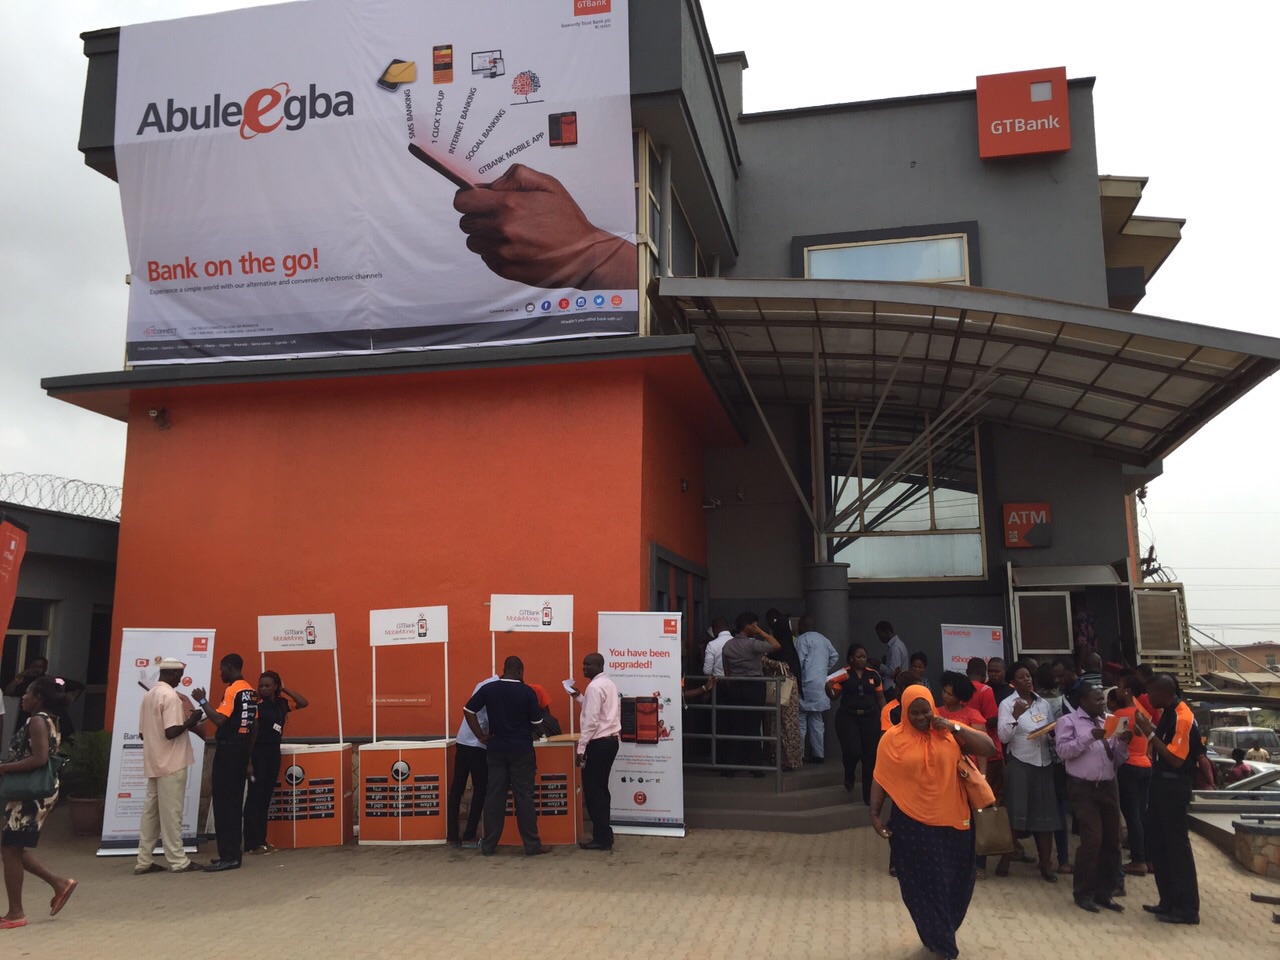 GTBank's restructuring plan is a big deal for the fintech industry